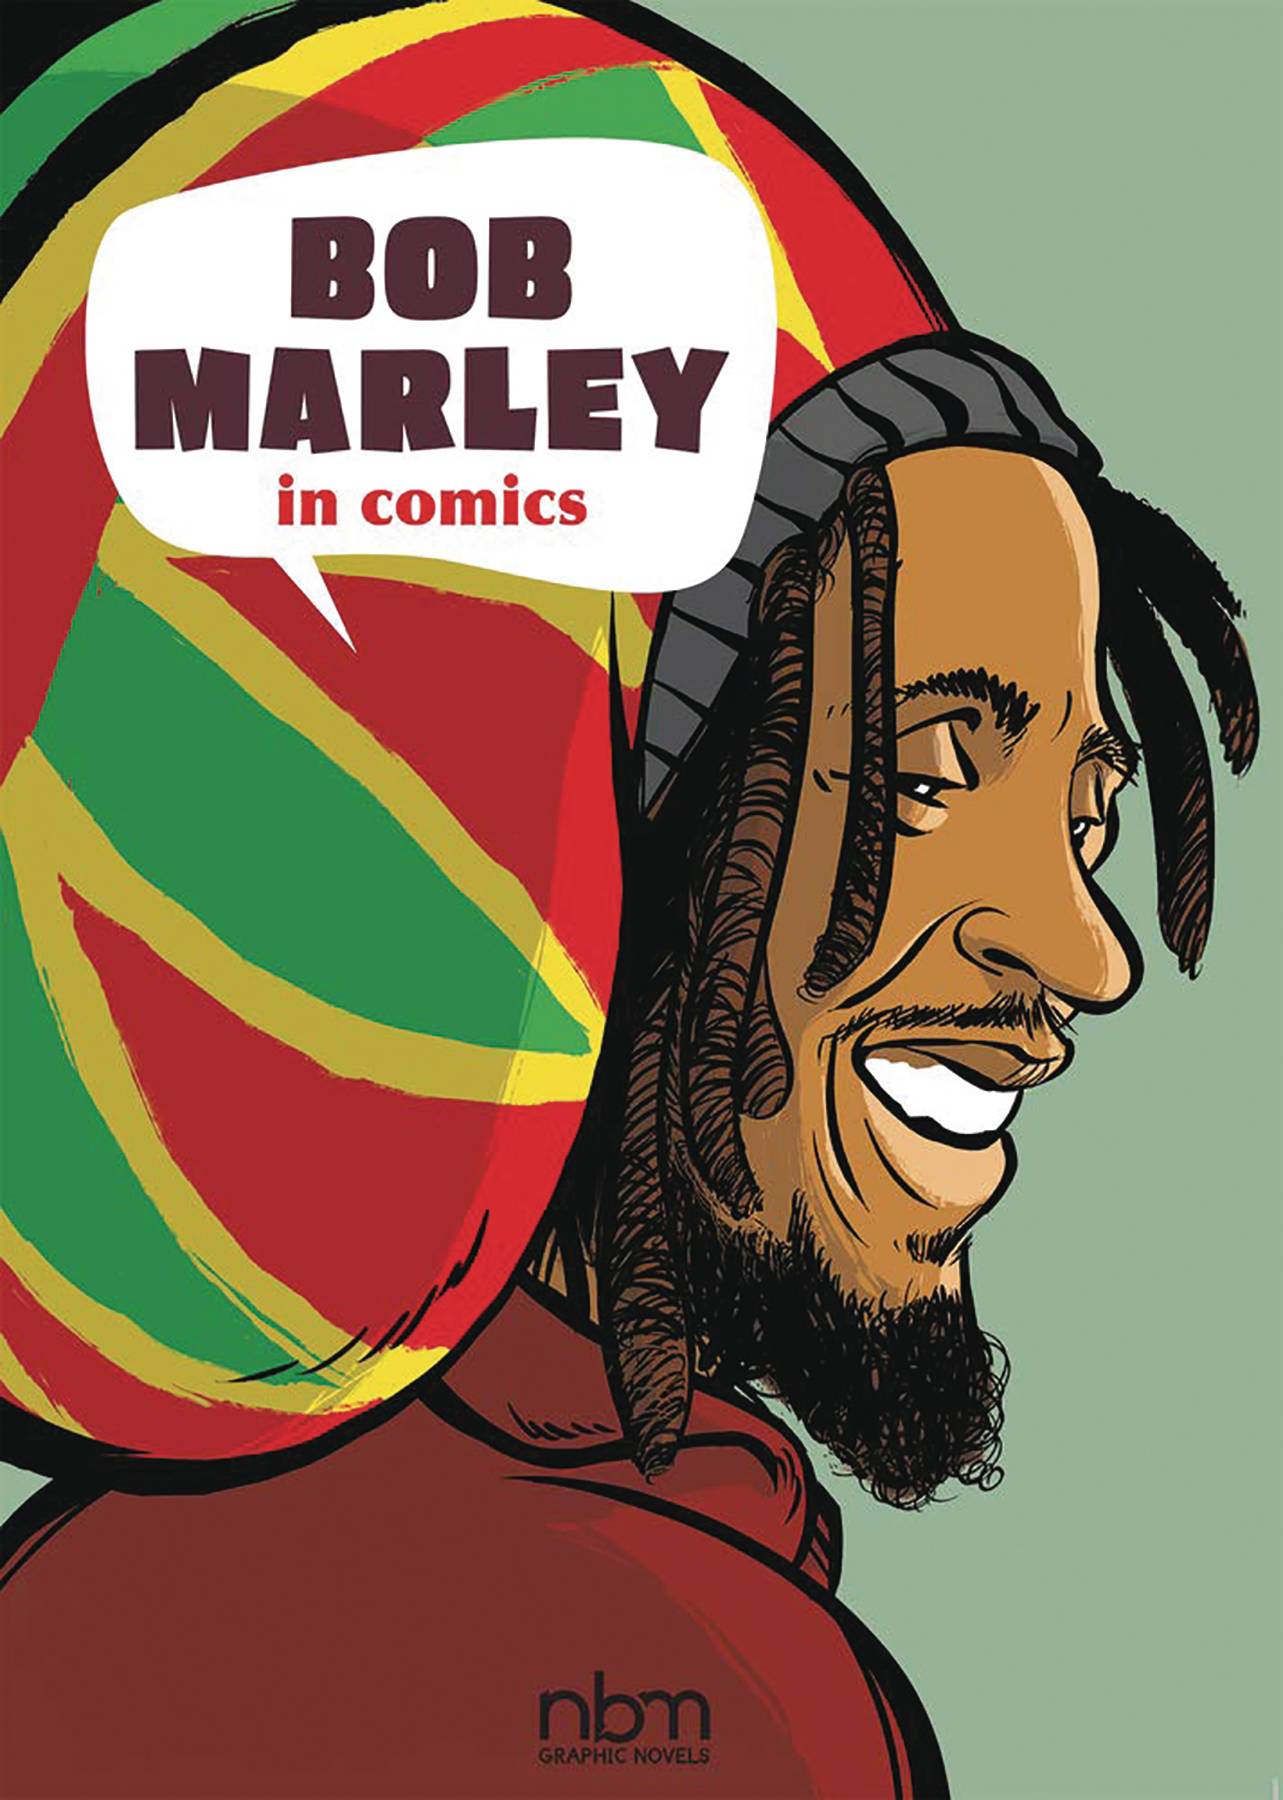 Graphic Novels for Winter 2020: Bob Marley In Comics!